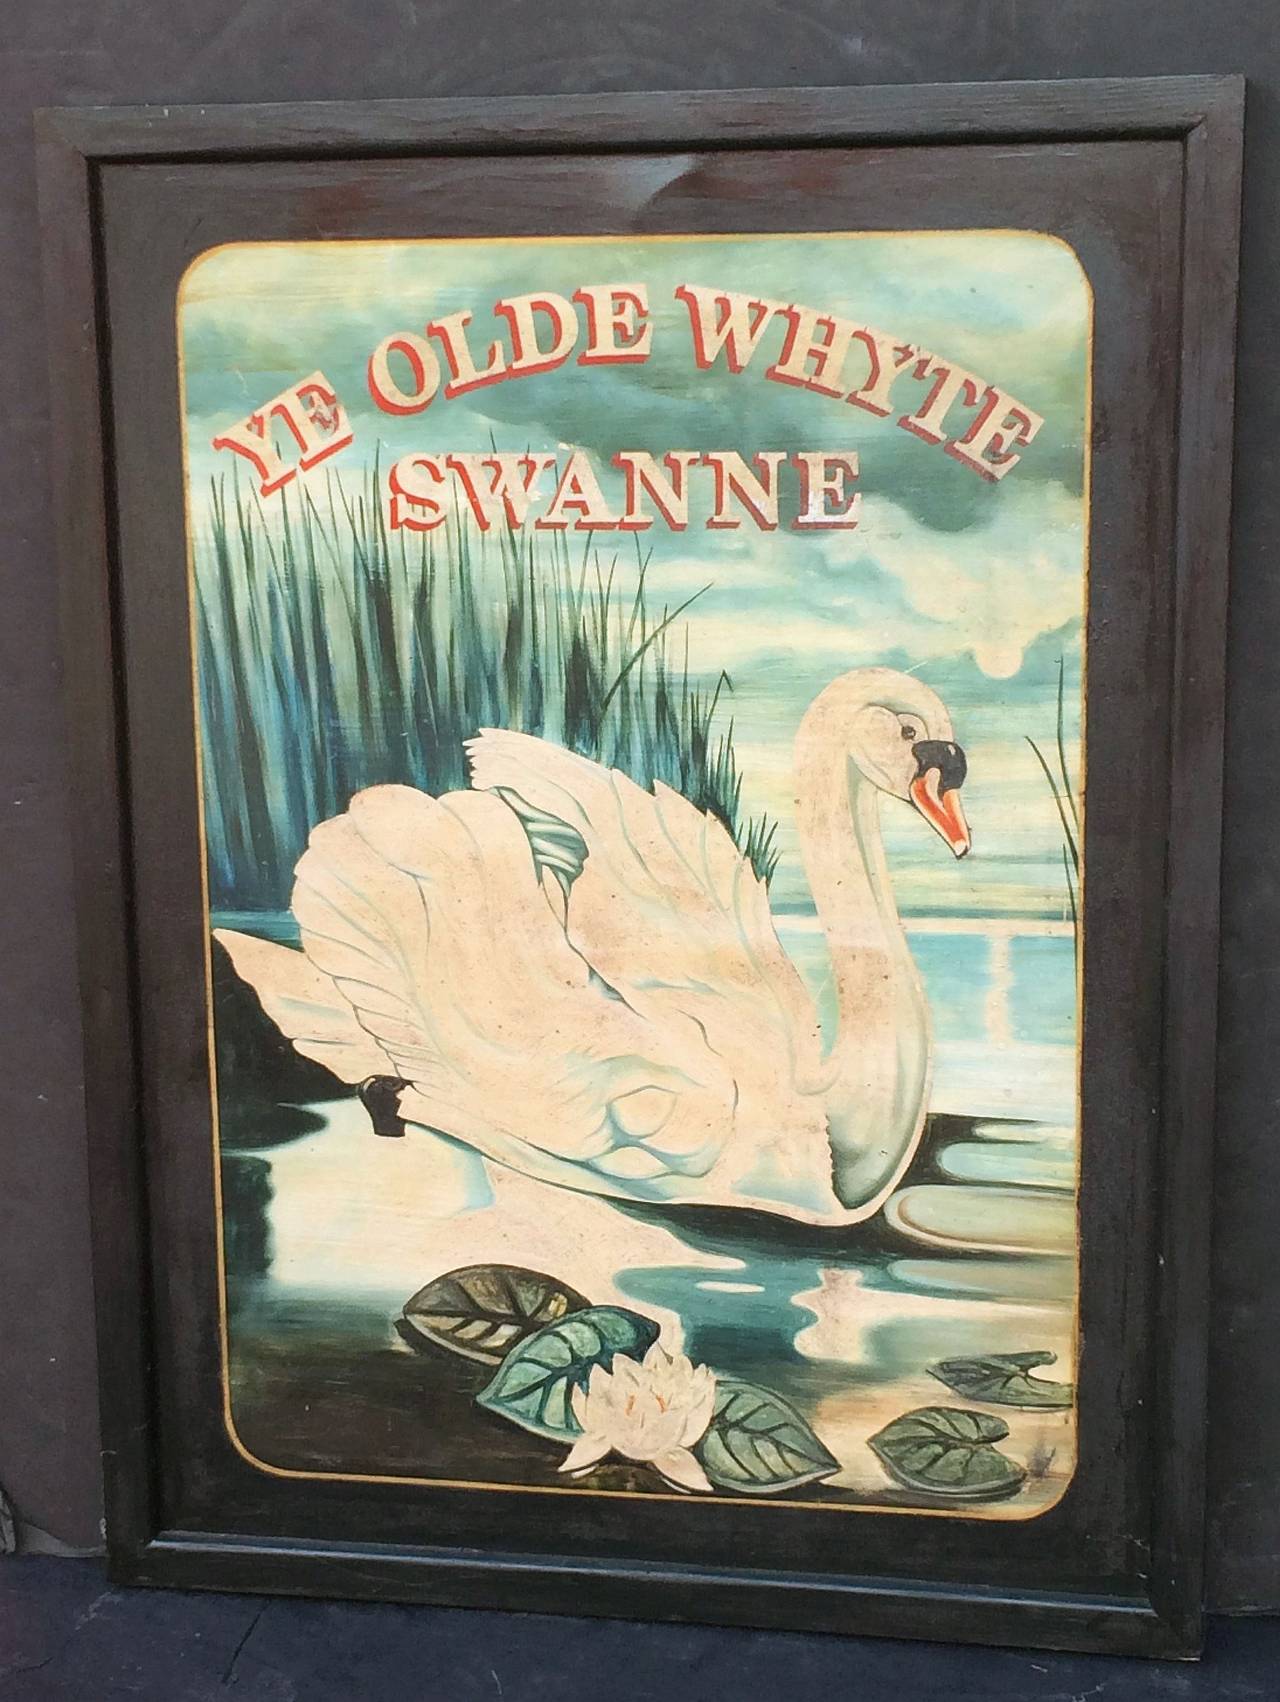 An authentic English pub sign (one-sided) featuring a scenic painting of a swan upon water, with water lilies in the foreground and reeds in the background, entitled: Ye Olde Whyte Swanne

A very fine example of vintage advertising artwork, ready